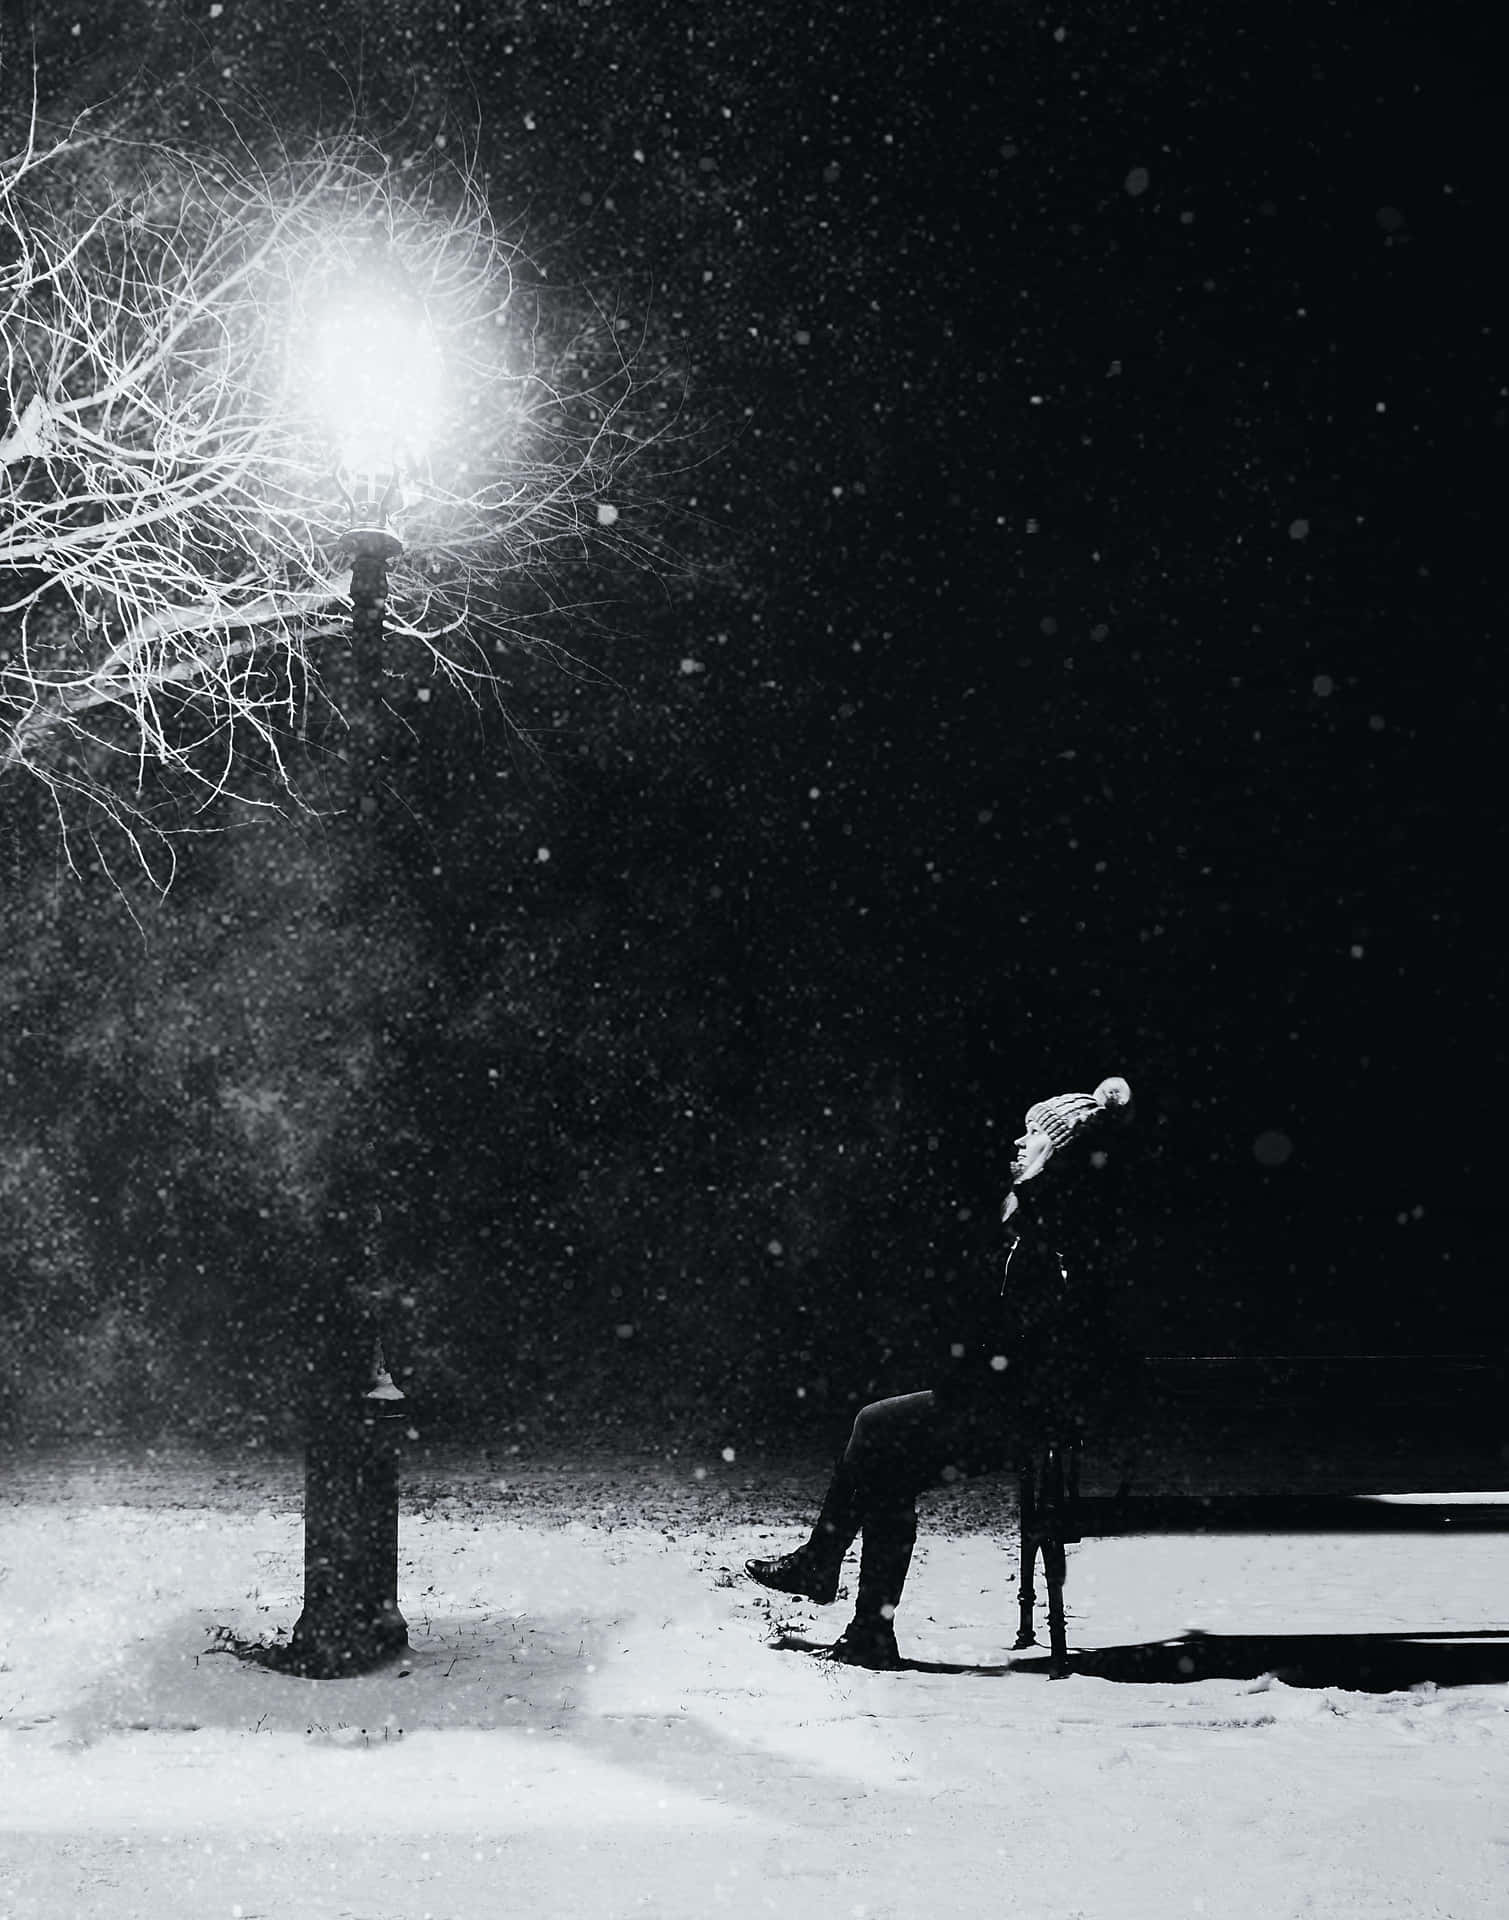 Person Waiting Beside The Street Light